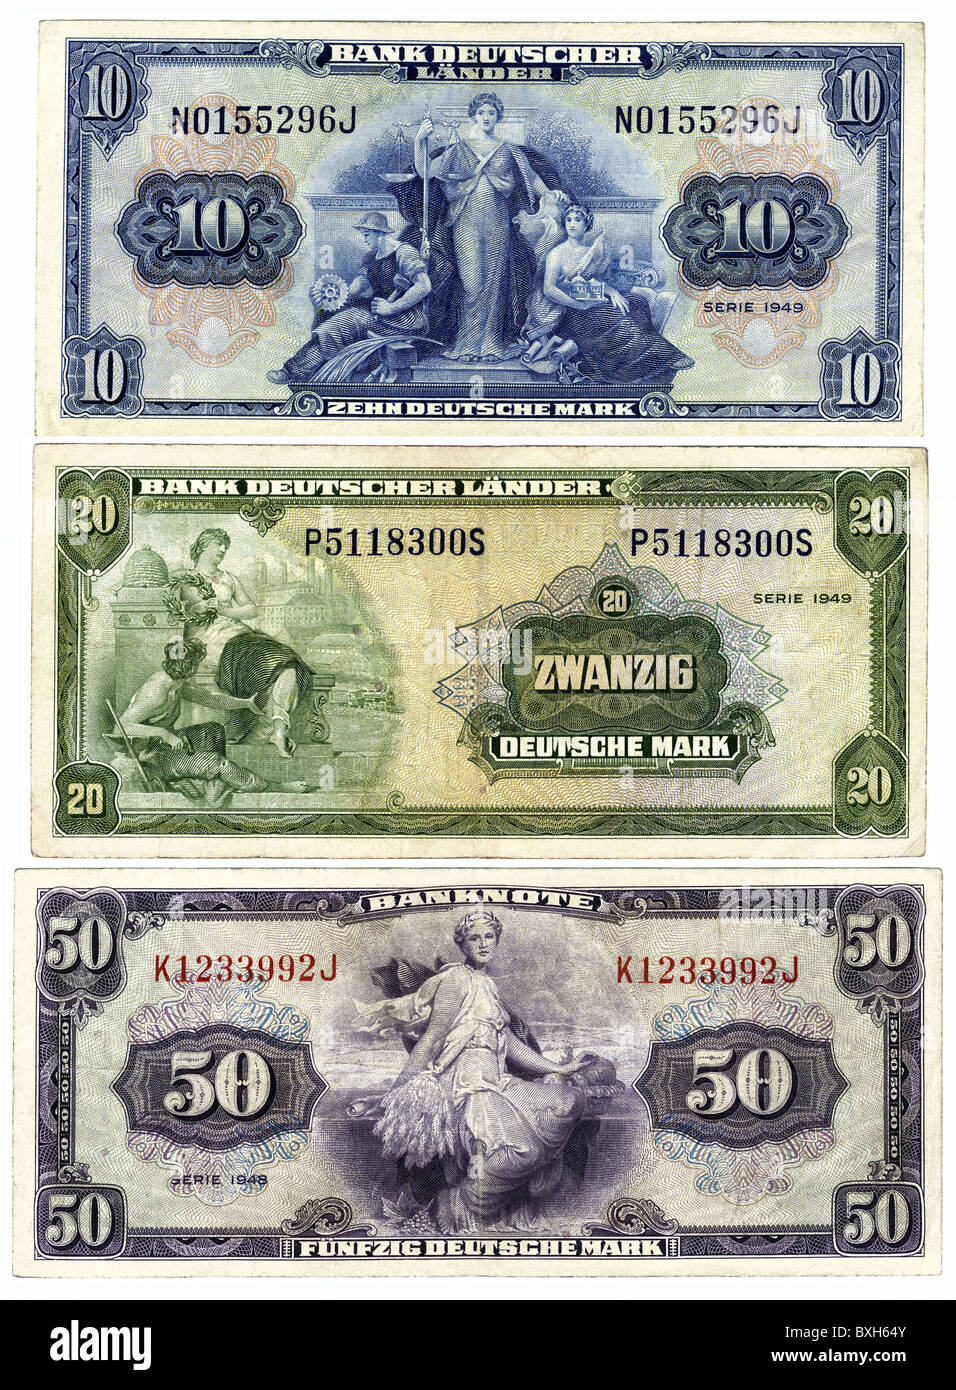 money / finance, bank notes, Germany, first banknotes of the BRD, 10, 20 and 50 Mark, 1949, historic, historical, German Marks, fifty, ten, twenty, banknote, bank note, bill , bank notes, post war period, currency, currencies, allegoric image of agriculture, allegory, steel engraving, clipping, cut out, 1940s, 40s, 20th century, numismatics, mark, German Mark, deutsche mark, deutschemark, deutschmark, mark, West German Mark, cut-out, cut-outs, people, Additional-Rights-Clearences-Not Available Stock Photo